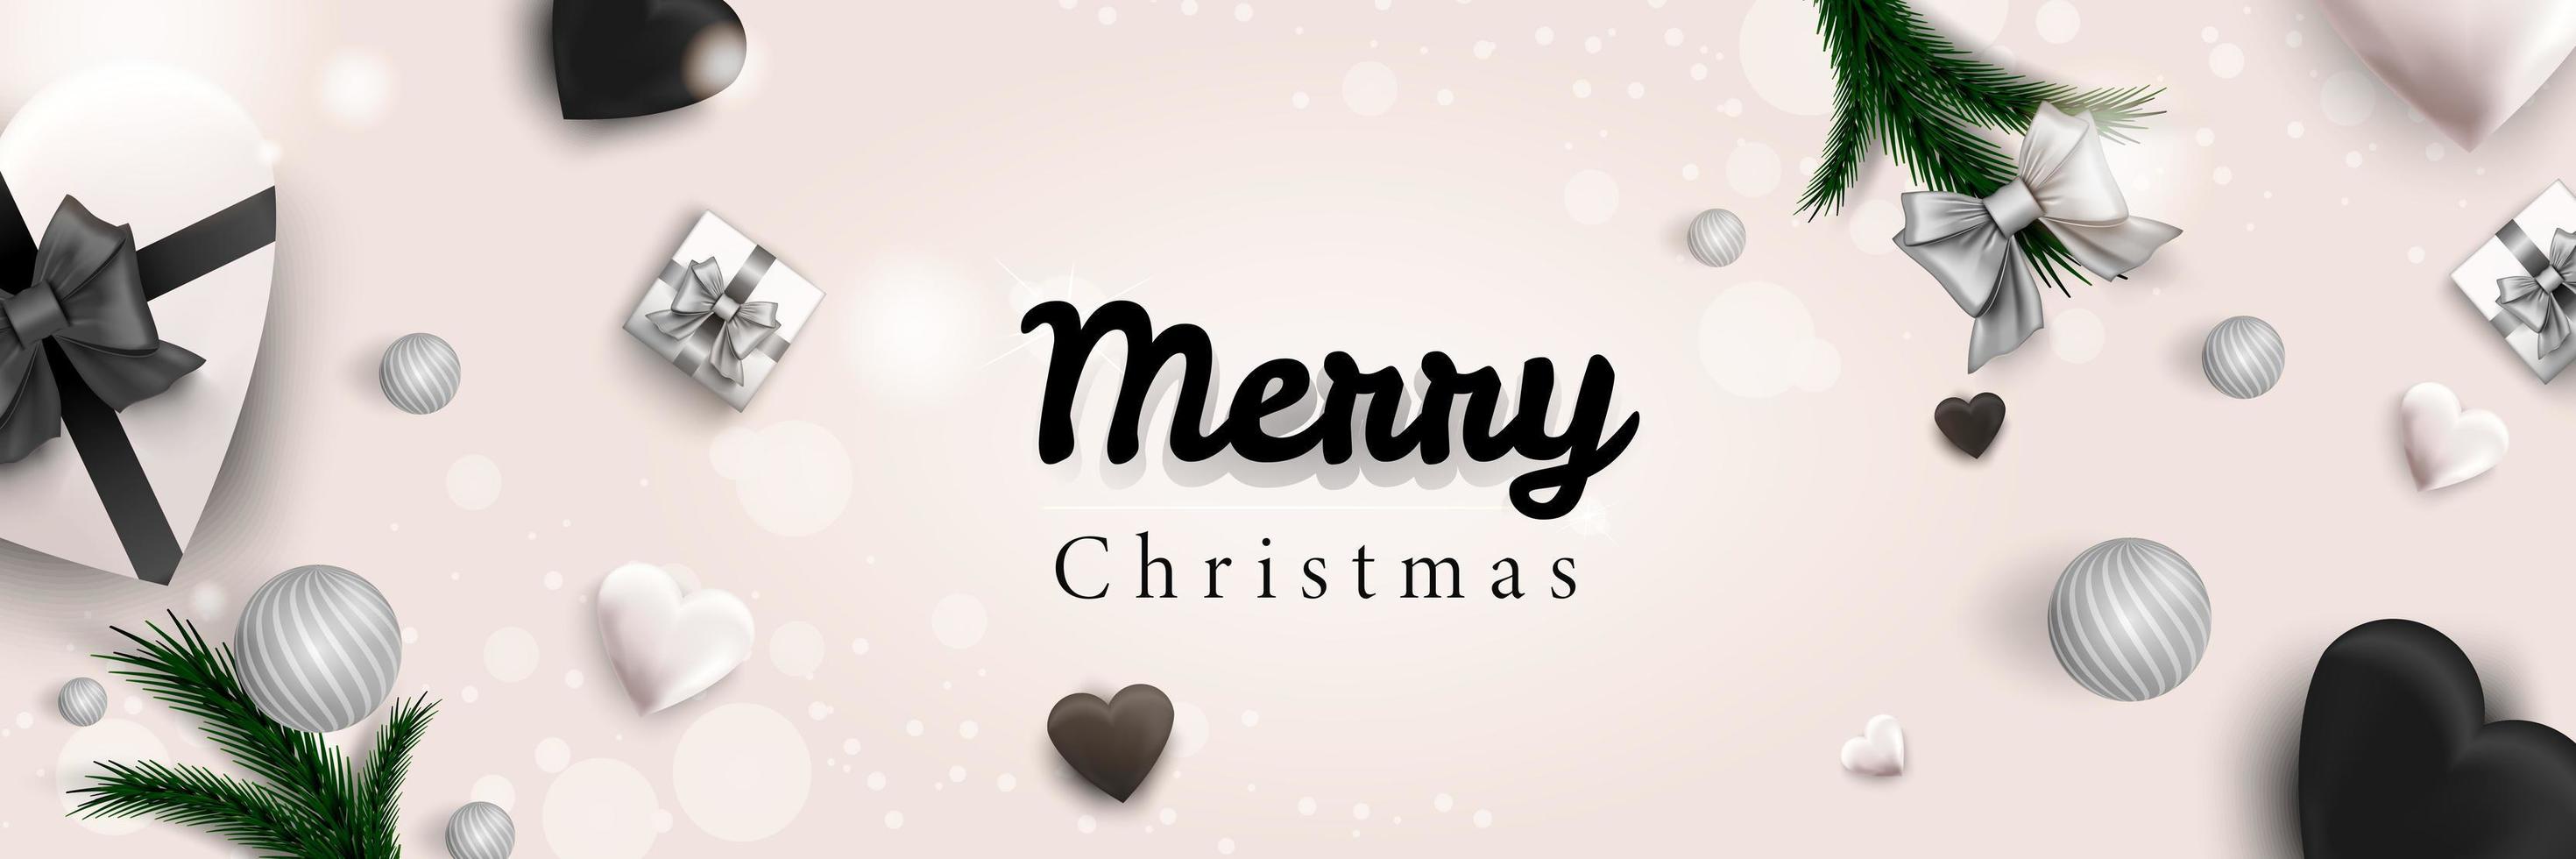 Merry Christmas web banner. Xmas and Happy New Year 2022 holiday celebration poster. Vector illustration with 3d realistic elements. Horizontal christmas poster, background, greeting cards, header.